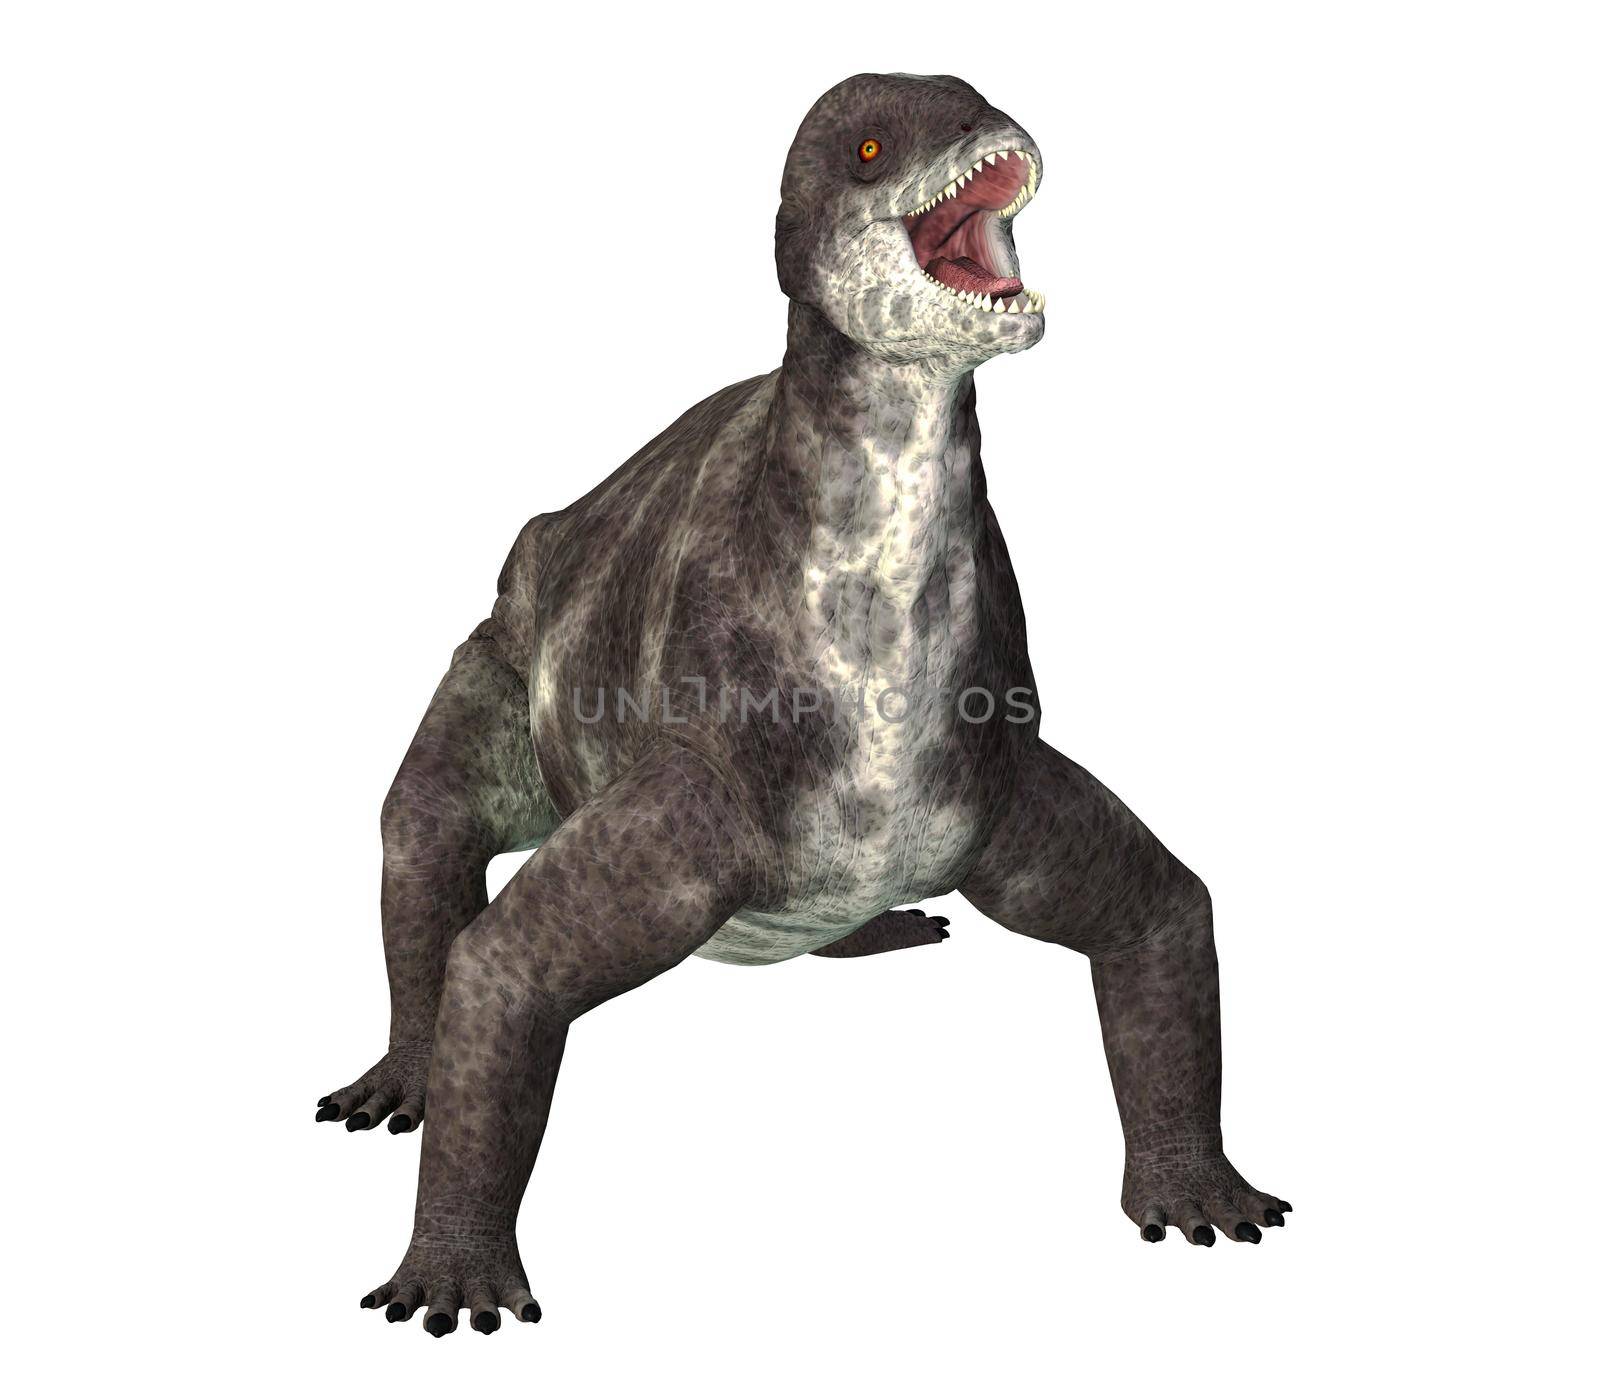 Criocephalosaurus was a therapsid dinosaur that lived during the Permian Period of South Africa.